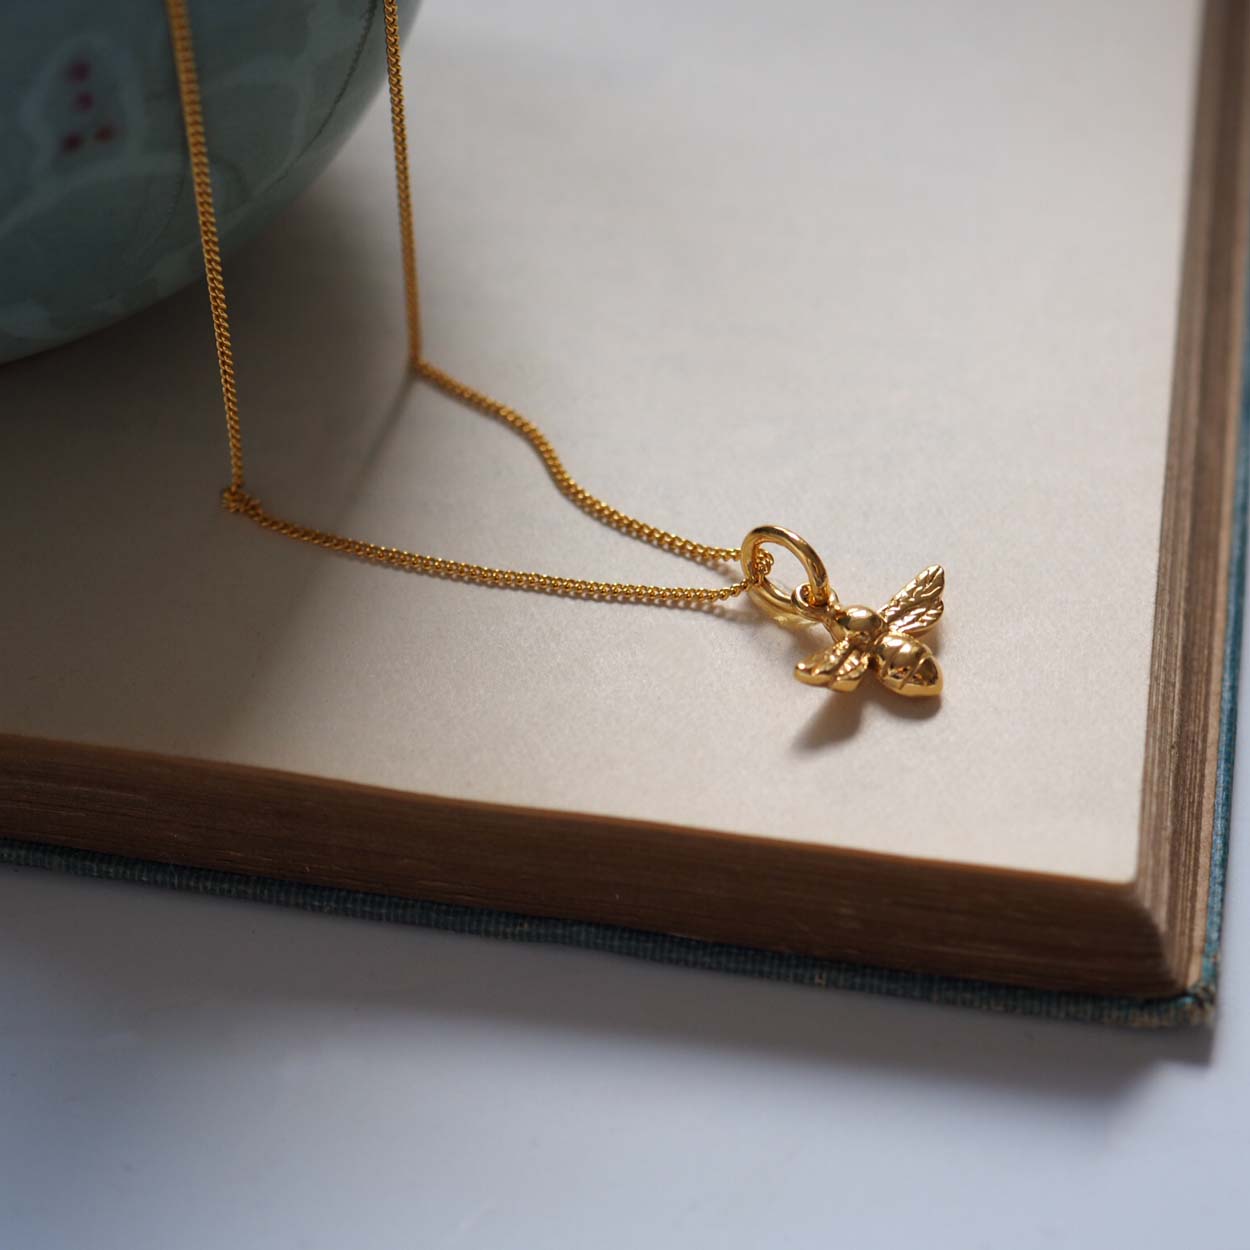 Bianca Jones Jewellery Bumble Bee Necklace in Sterling Silver and 18ct Gold Vermeil - Symbol of Love and Nature